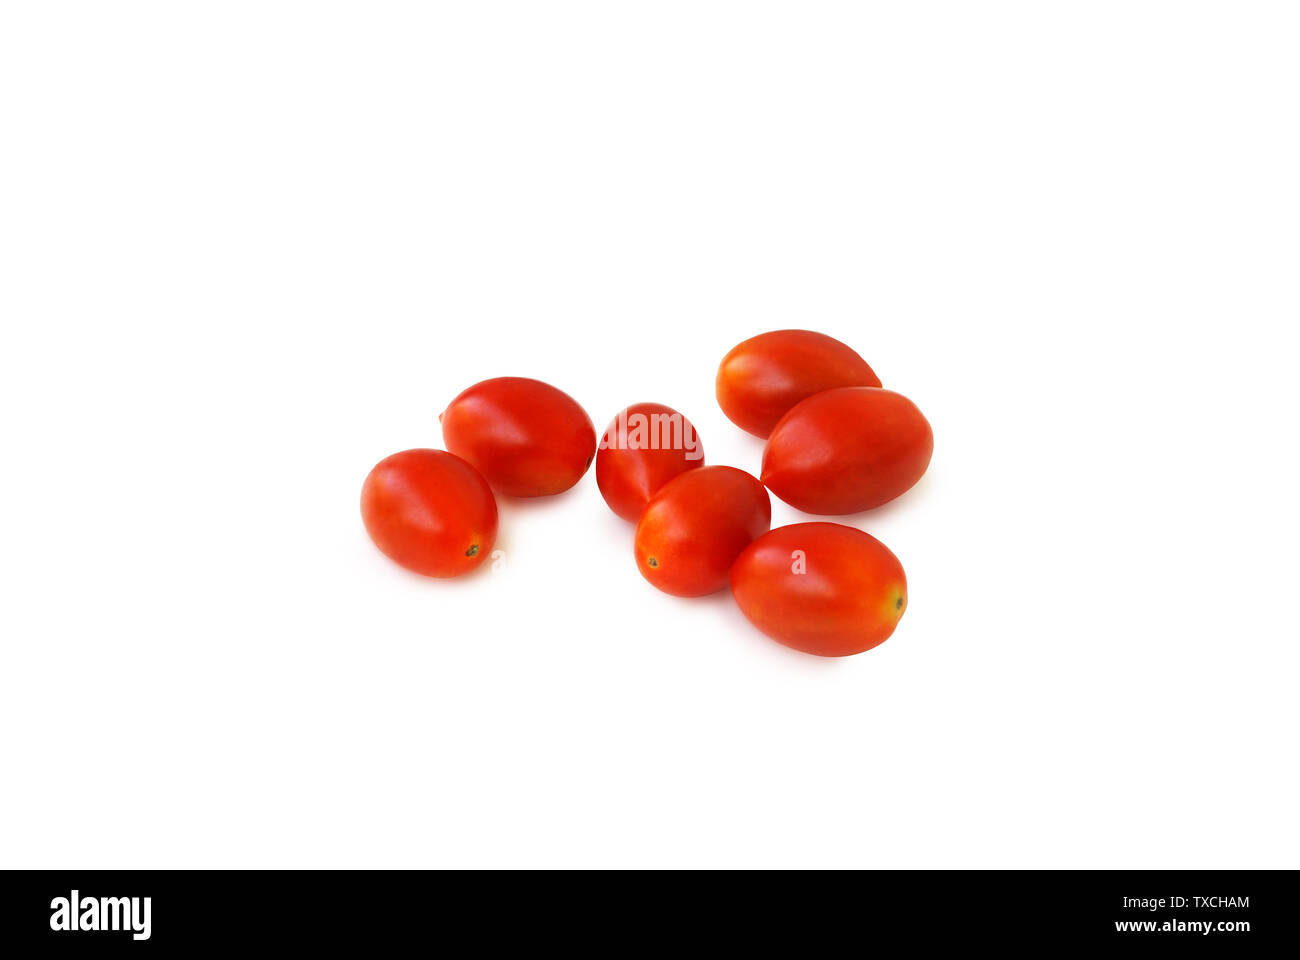 Cherry Tomatoes on white background.Lycopersicon esculentum Mill.Helps the body to fight asthma up to 45%.Help prevent dementia or Alzheimer's disease Stock Photo